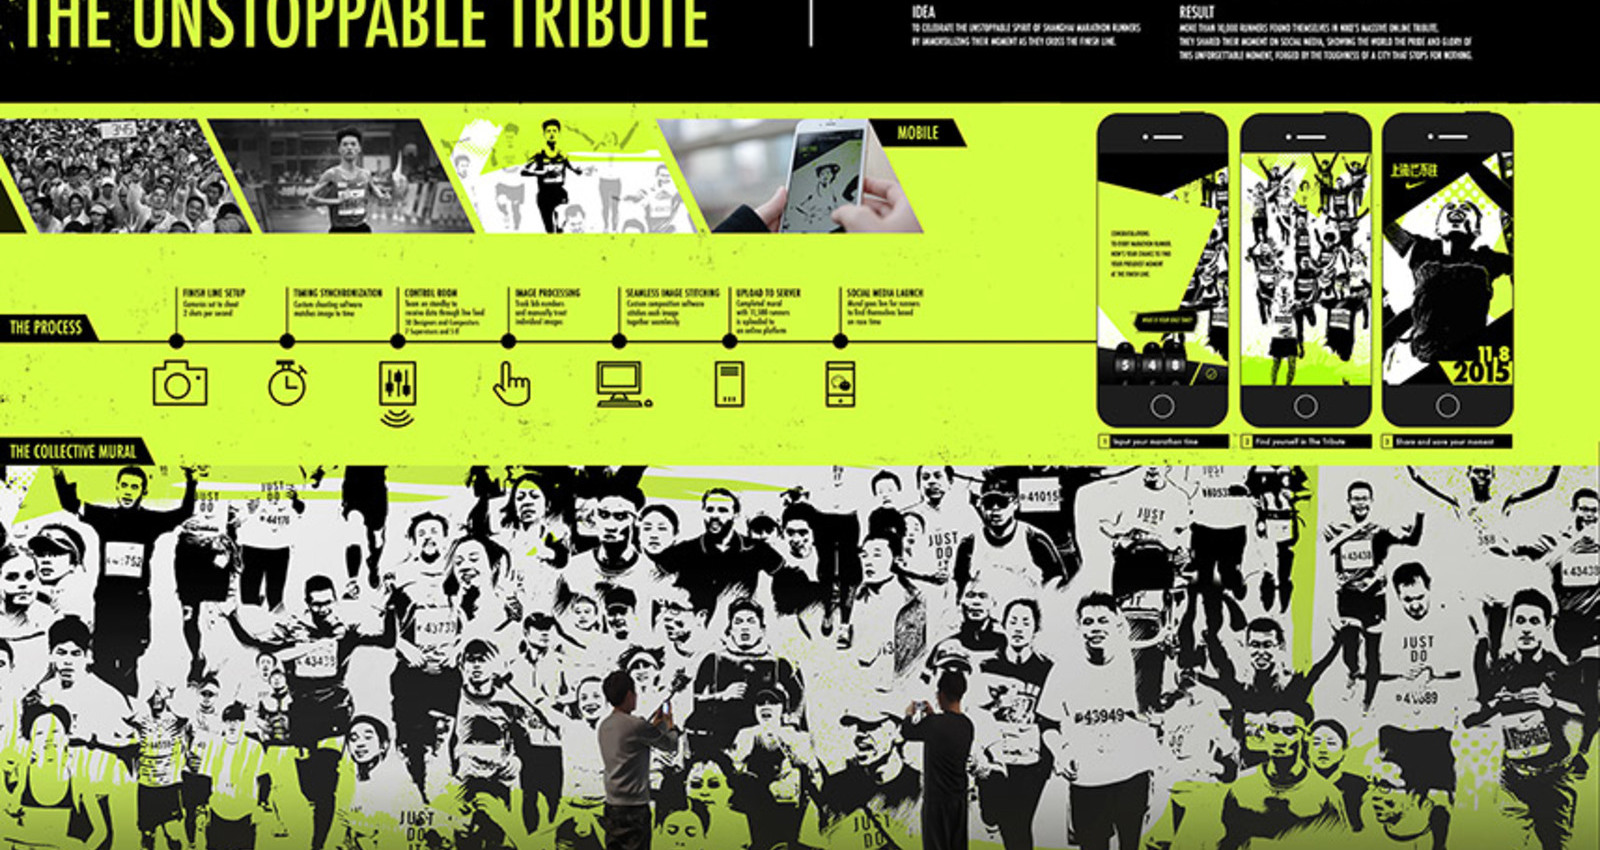 2015 NIKE JDI SHANGHAI CITY ATTACK - The Unstoppable Tribute